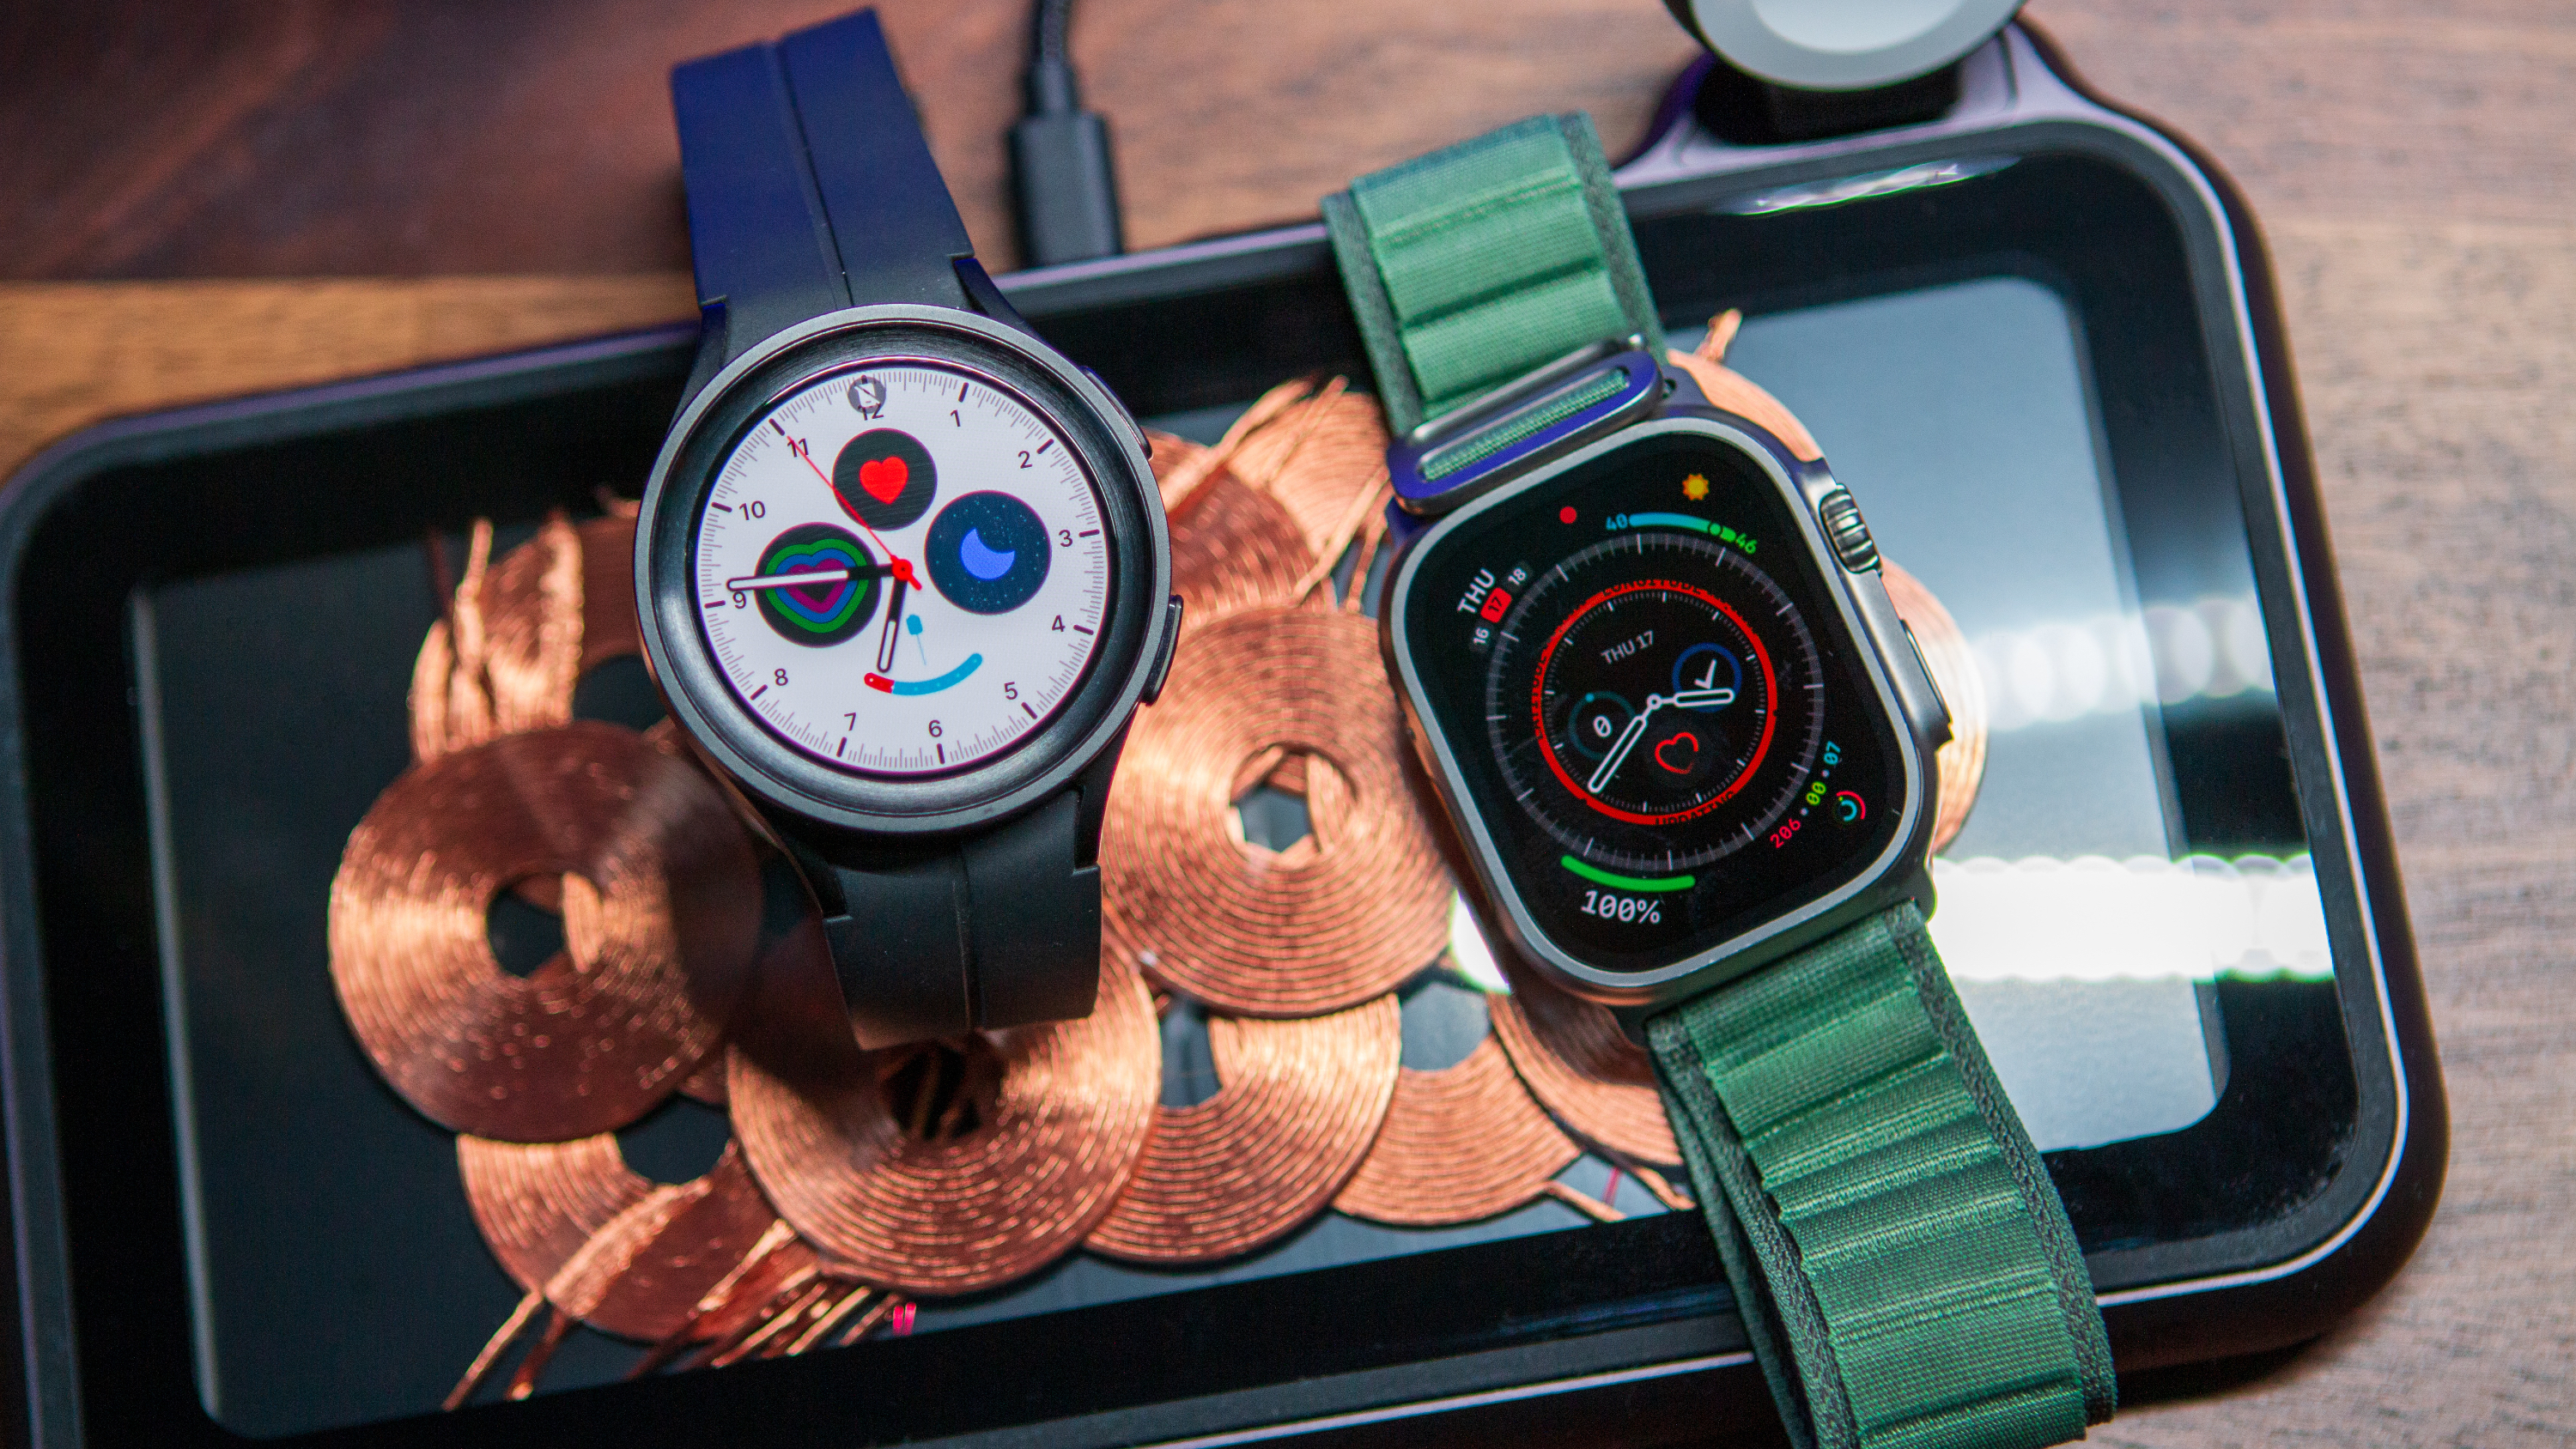 The Samsung Galaxy Watch Pro (left) and Apple Watch Ultra (right) side-by-side.